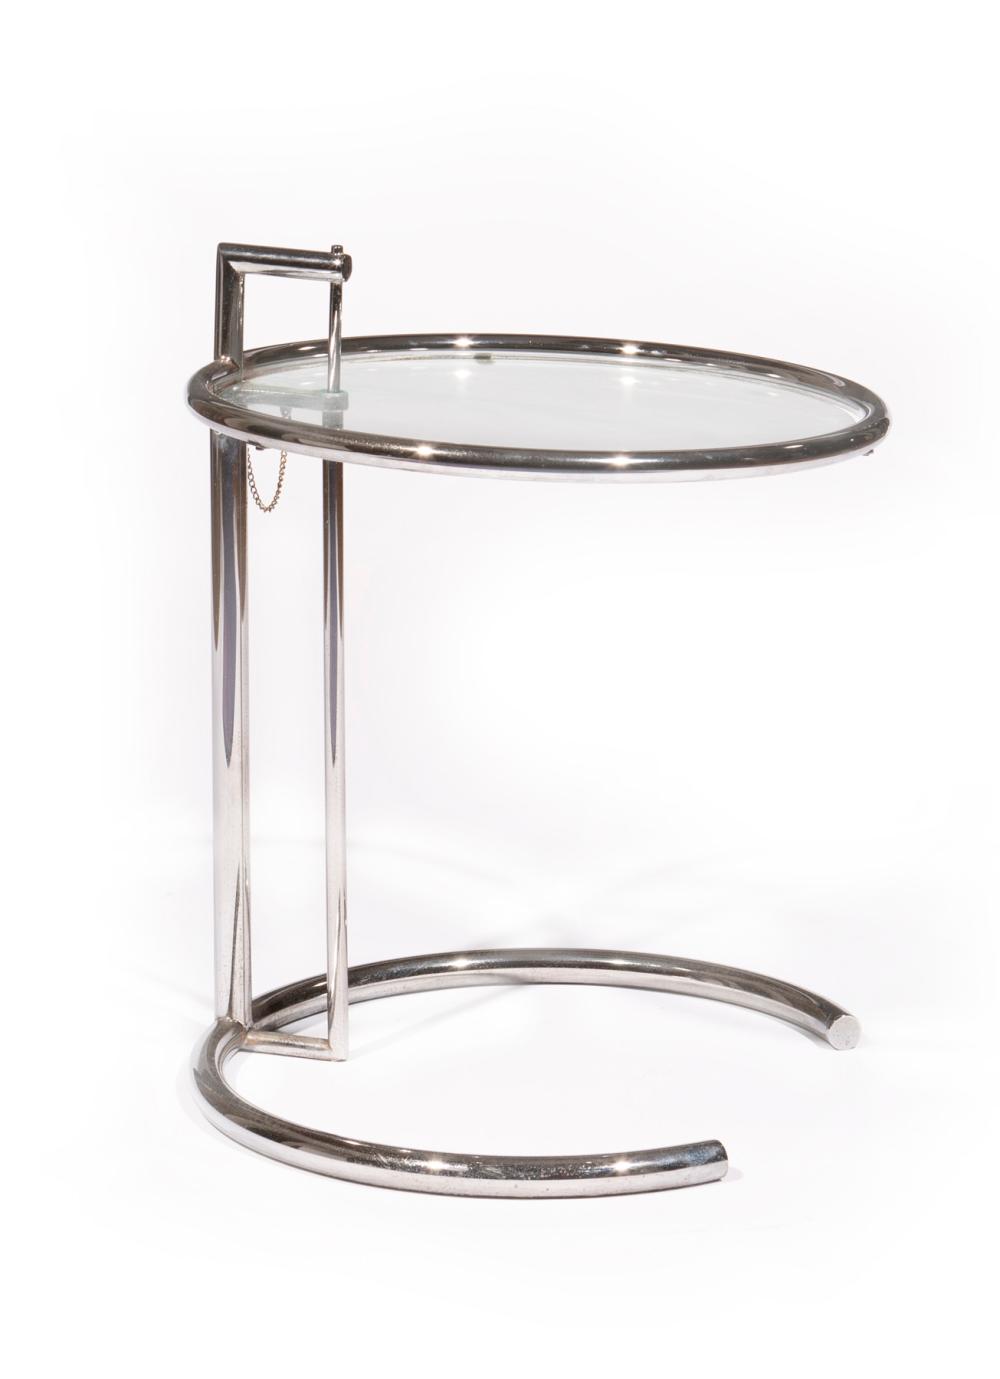 EILEEN GRAY CHROME AND GLASS SIDE 31816f